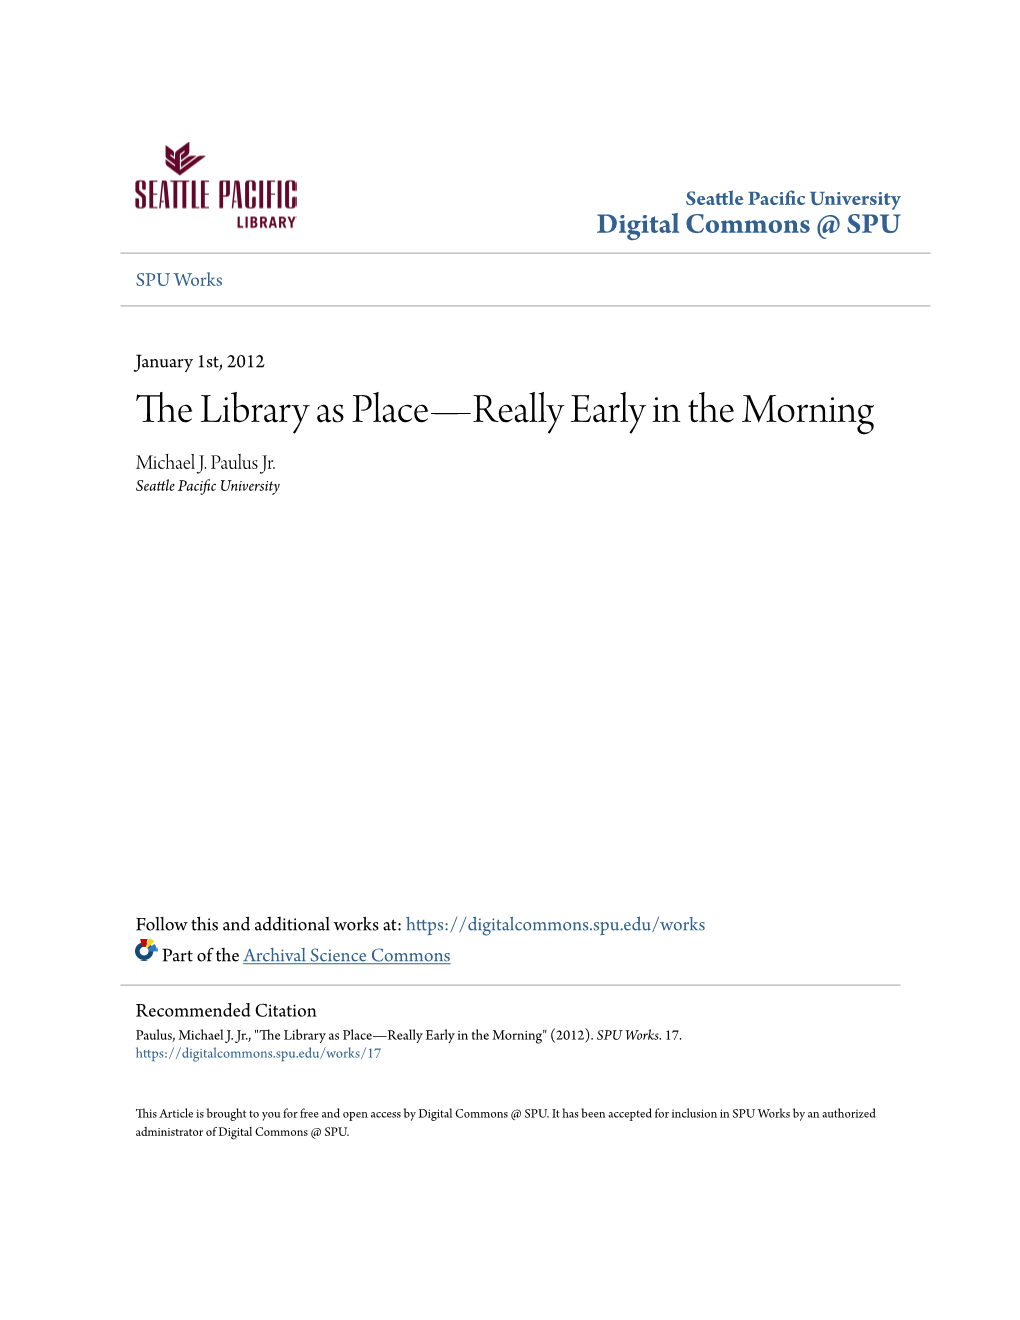 The Library As Place—Really Early in the Morning Michael J